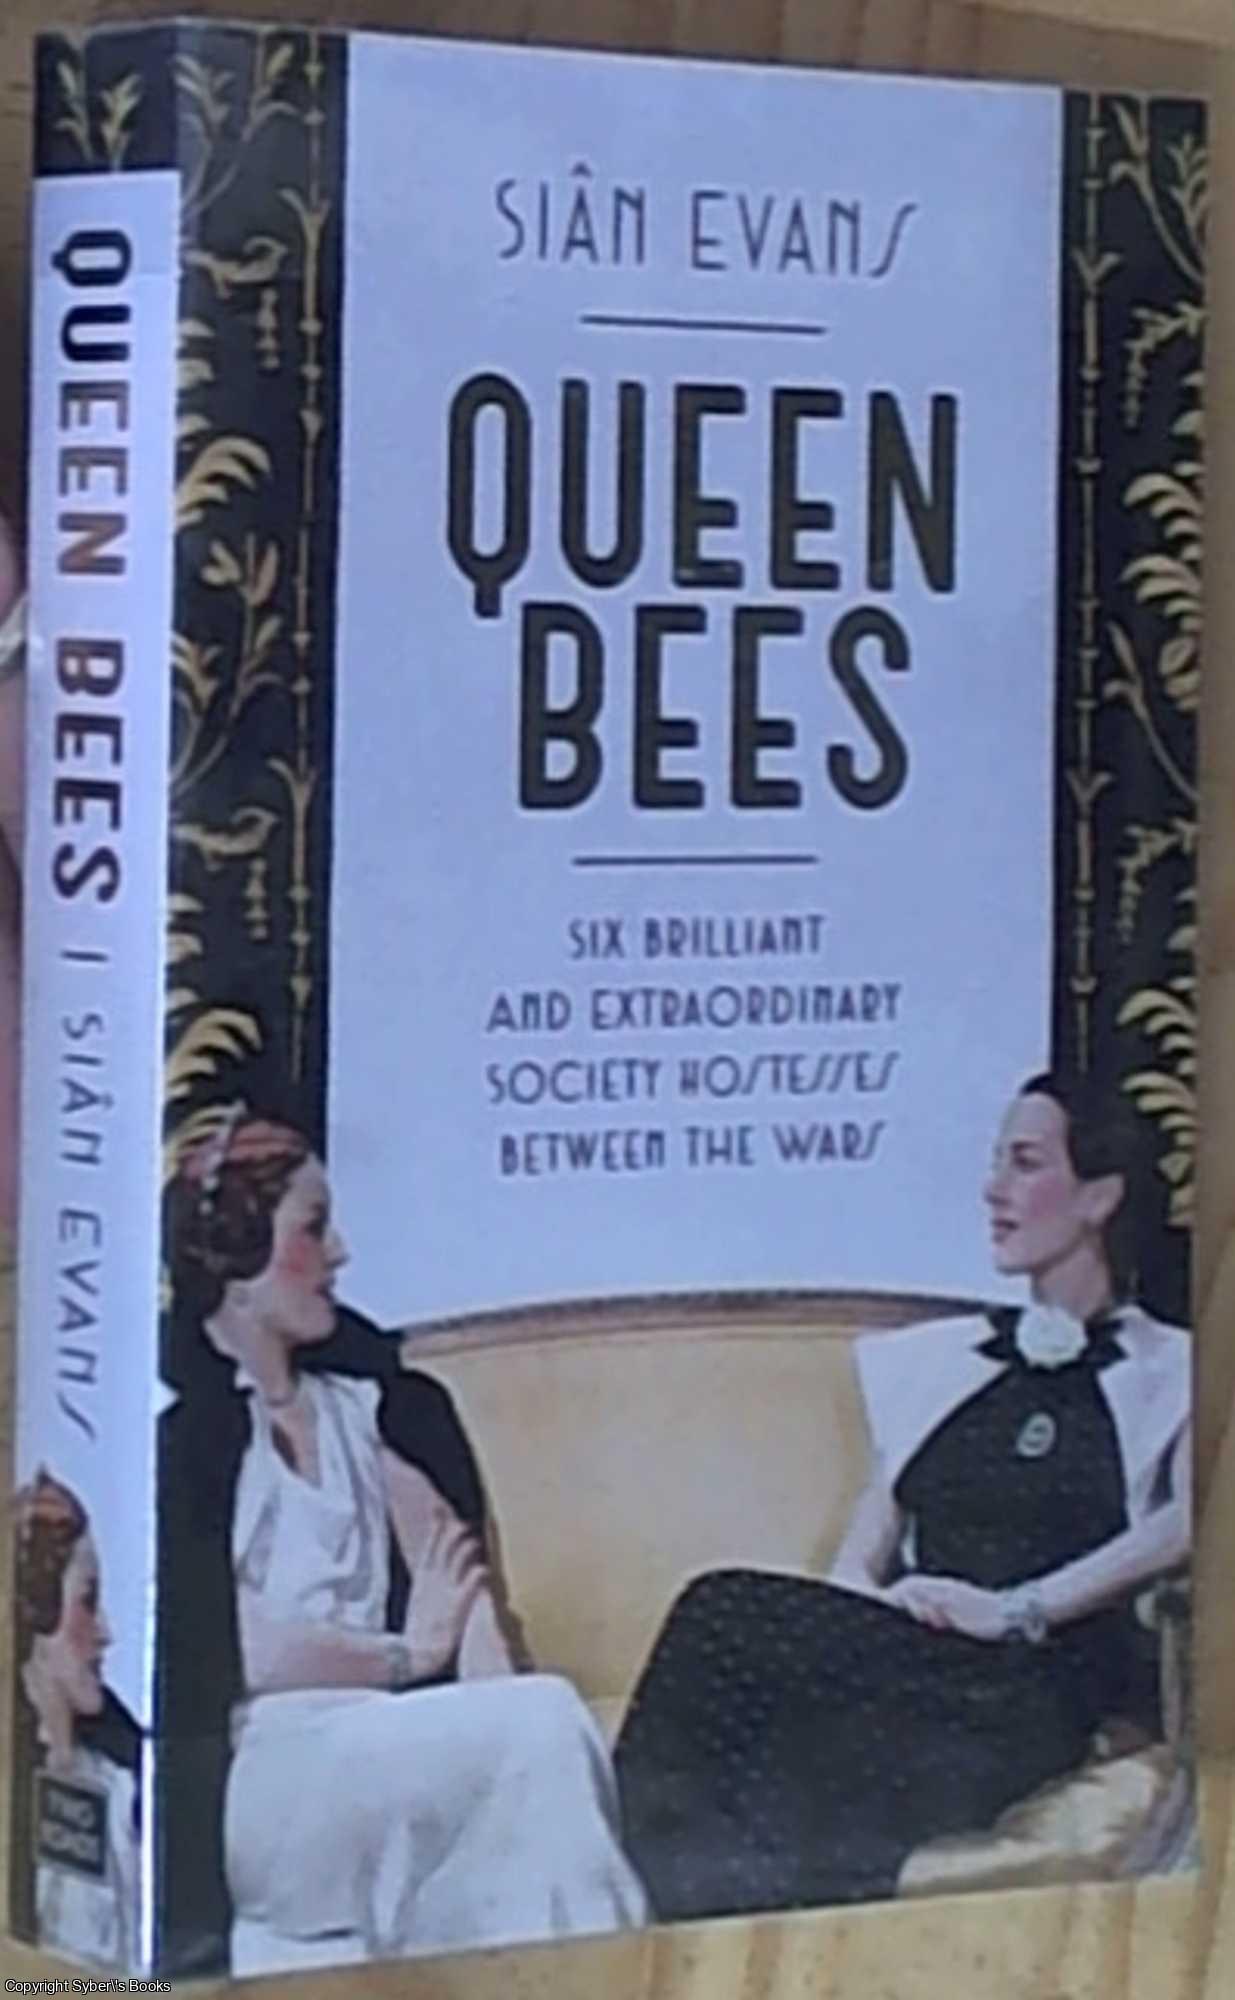 Evans, Sin - Queen Bees: Six Brilliant and Extraordinary Society Hostesses Between the Wars  A Spectacle of Celebrity, Talent, and Burning Ambition